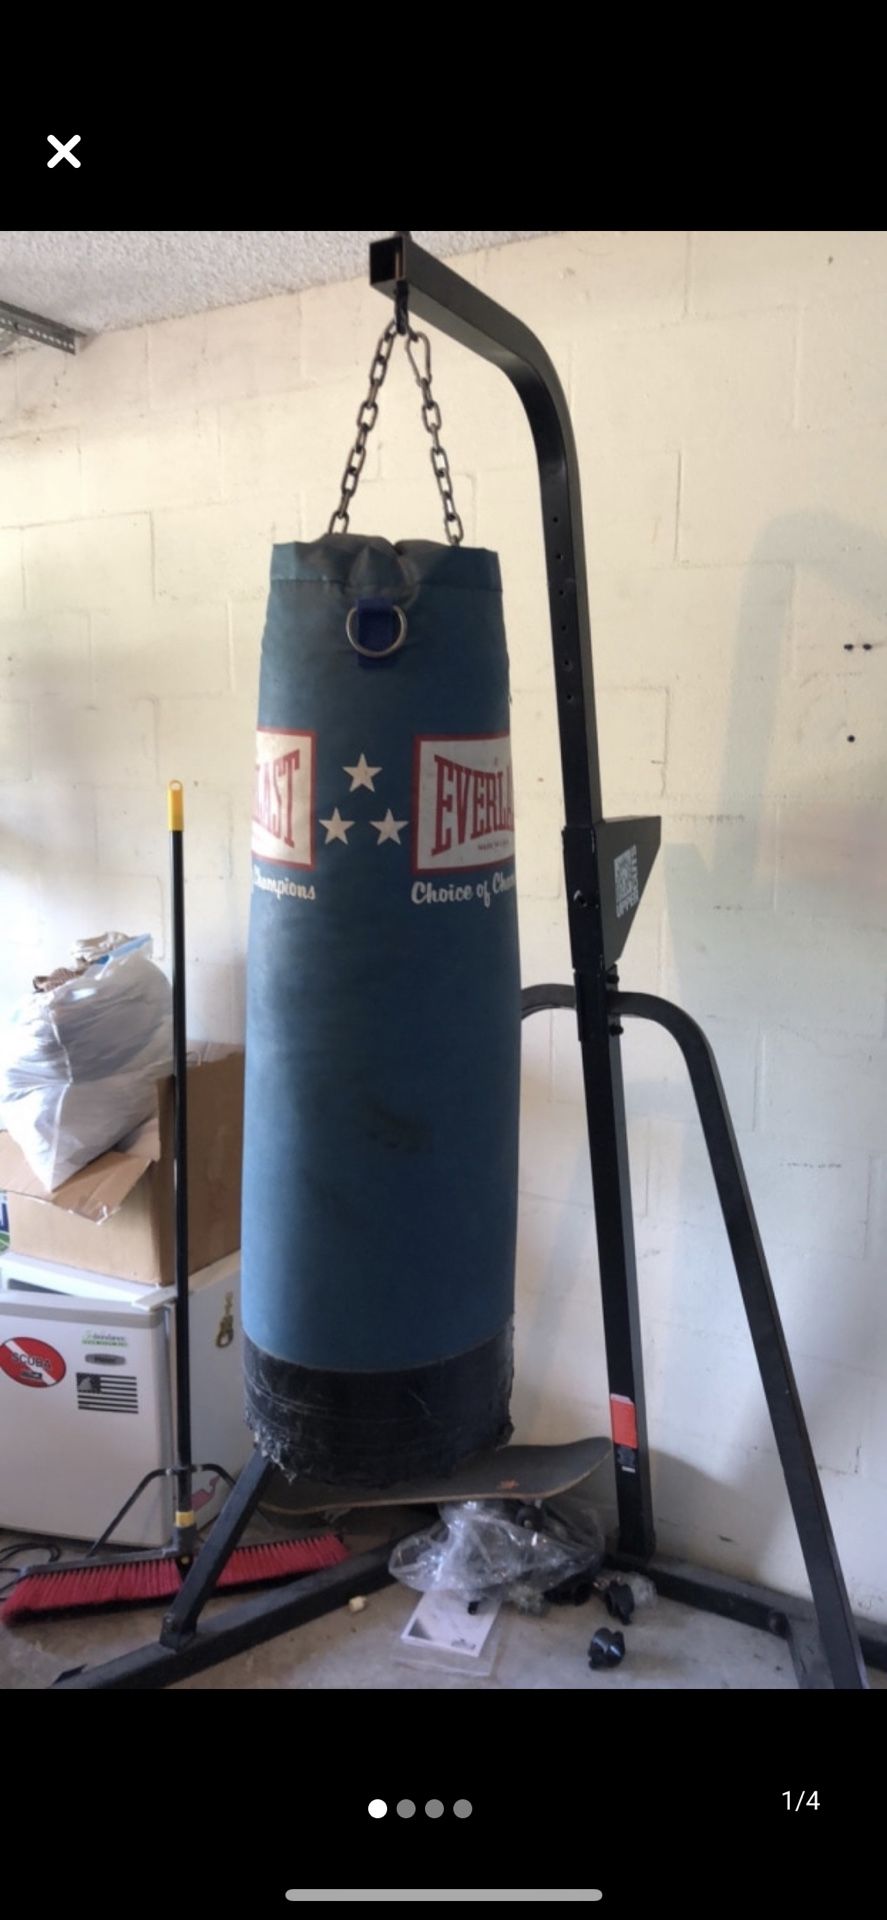 Everlast punching bag and Uppercuts stand